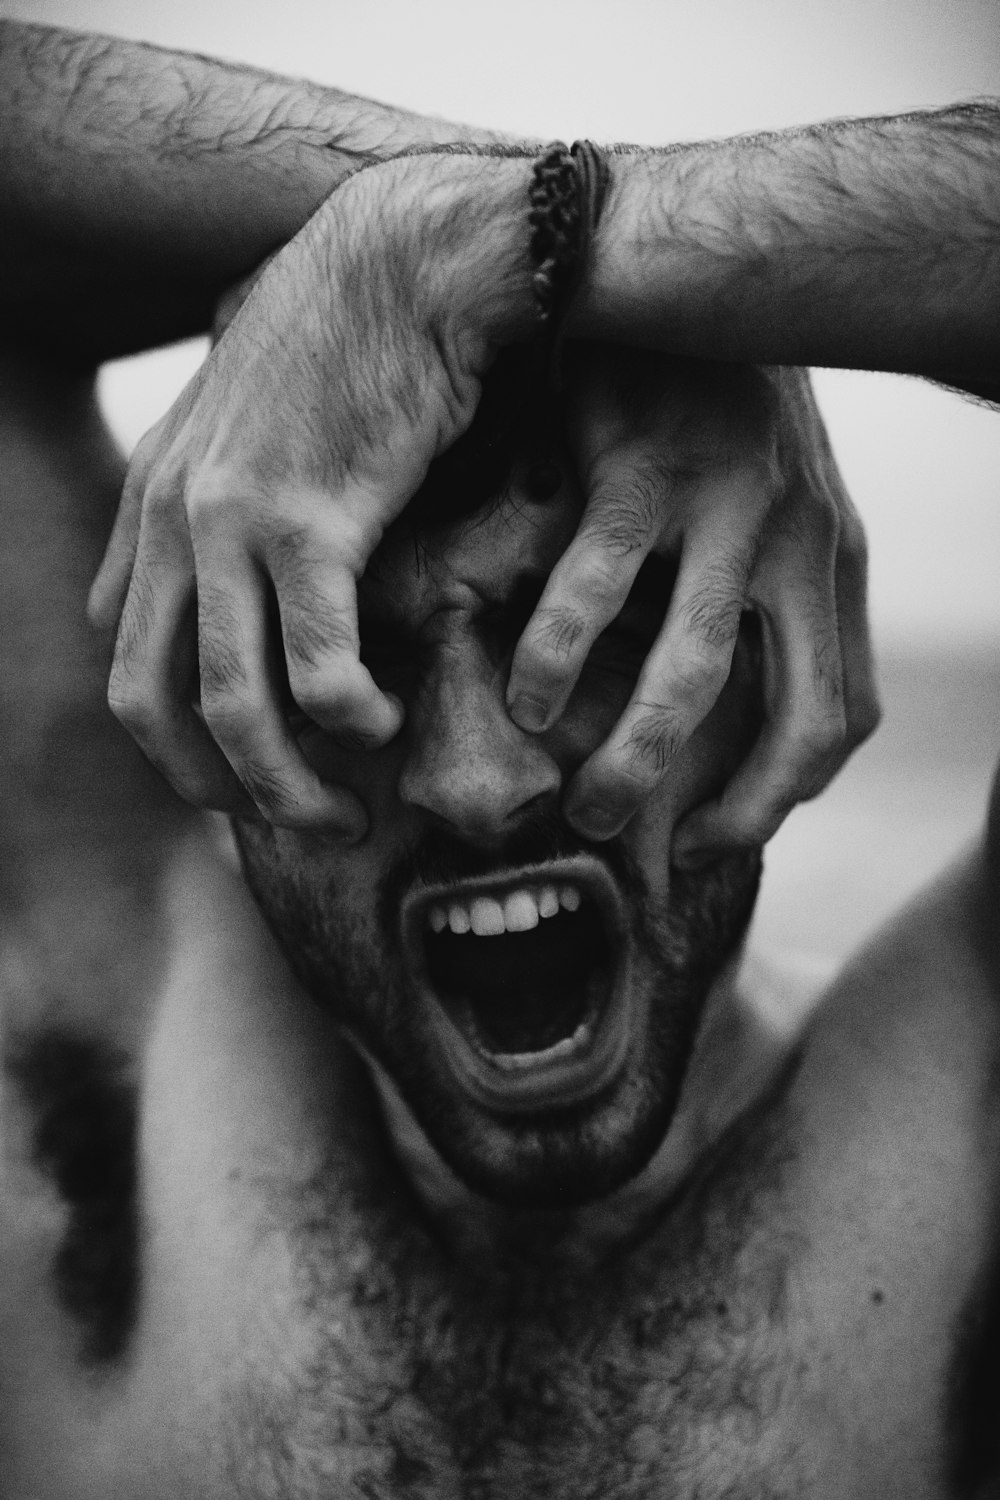 100 Angry Pictures Hd Download Free Images On Unsplash Images, Photos, Reviews